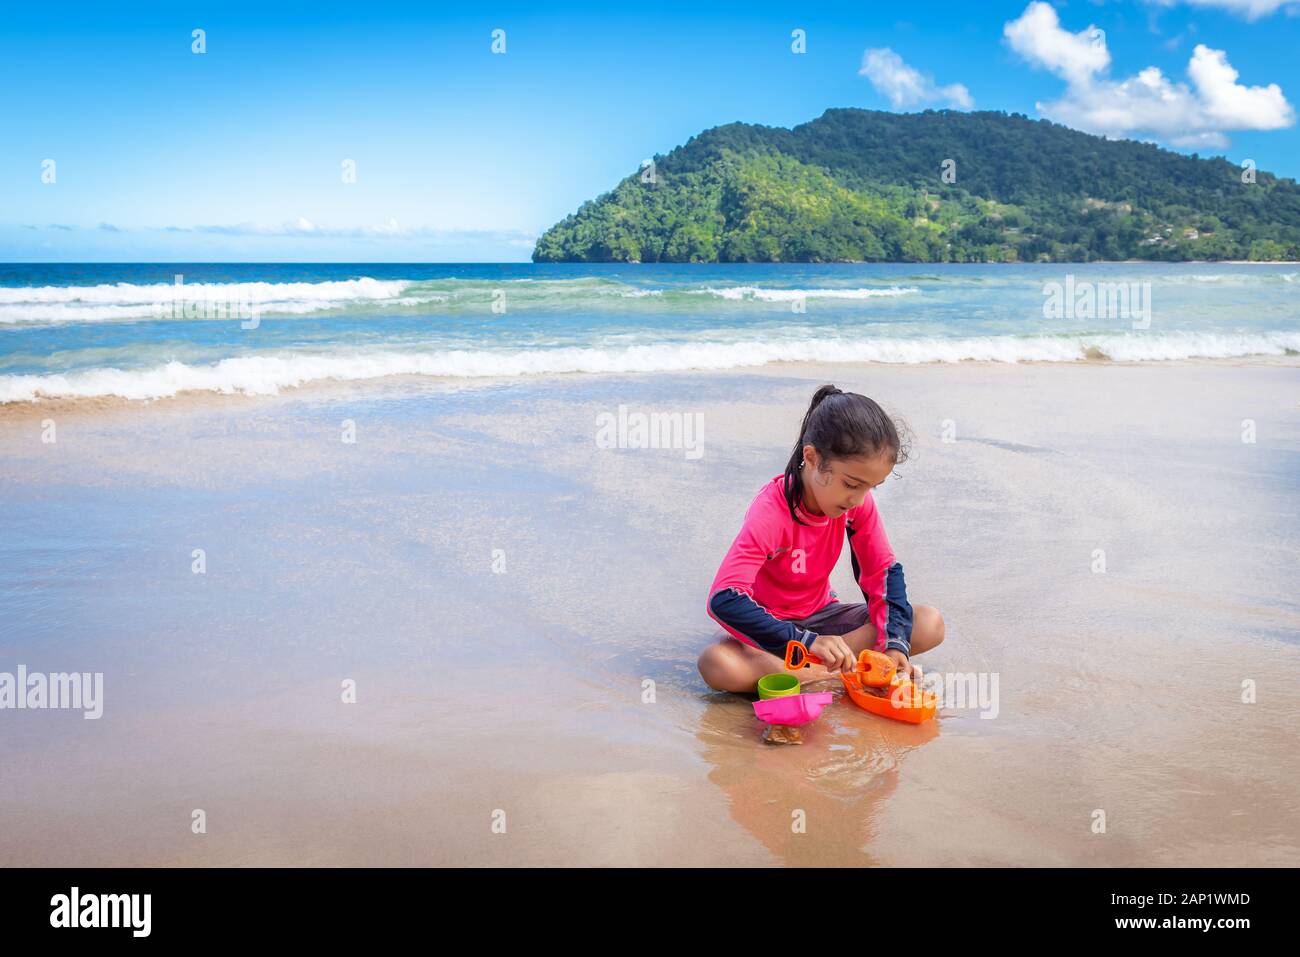 Little girl playing with sand on Maracas Bay Beach Trinidad and Tobago sitting outdoors fun activity Stock Photo